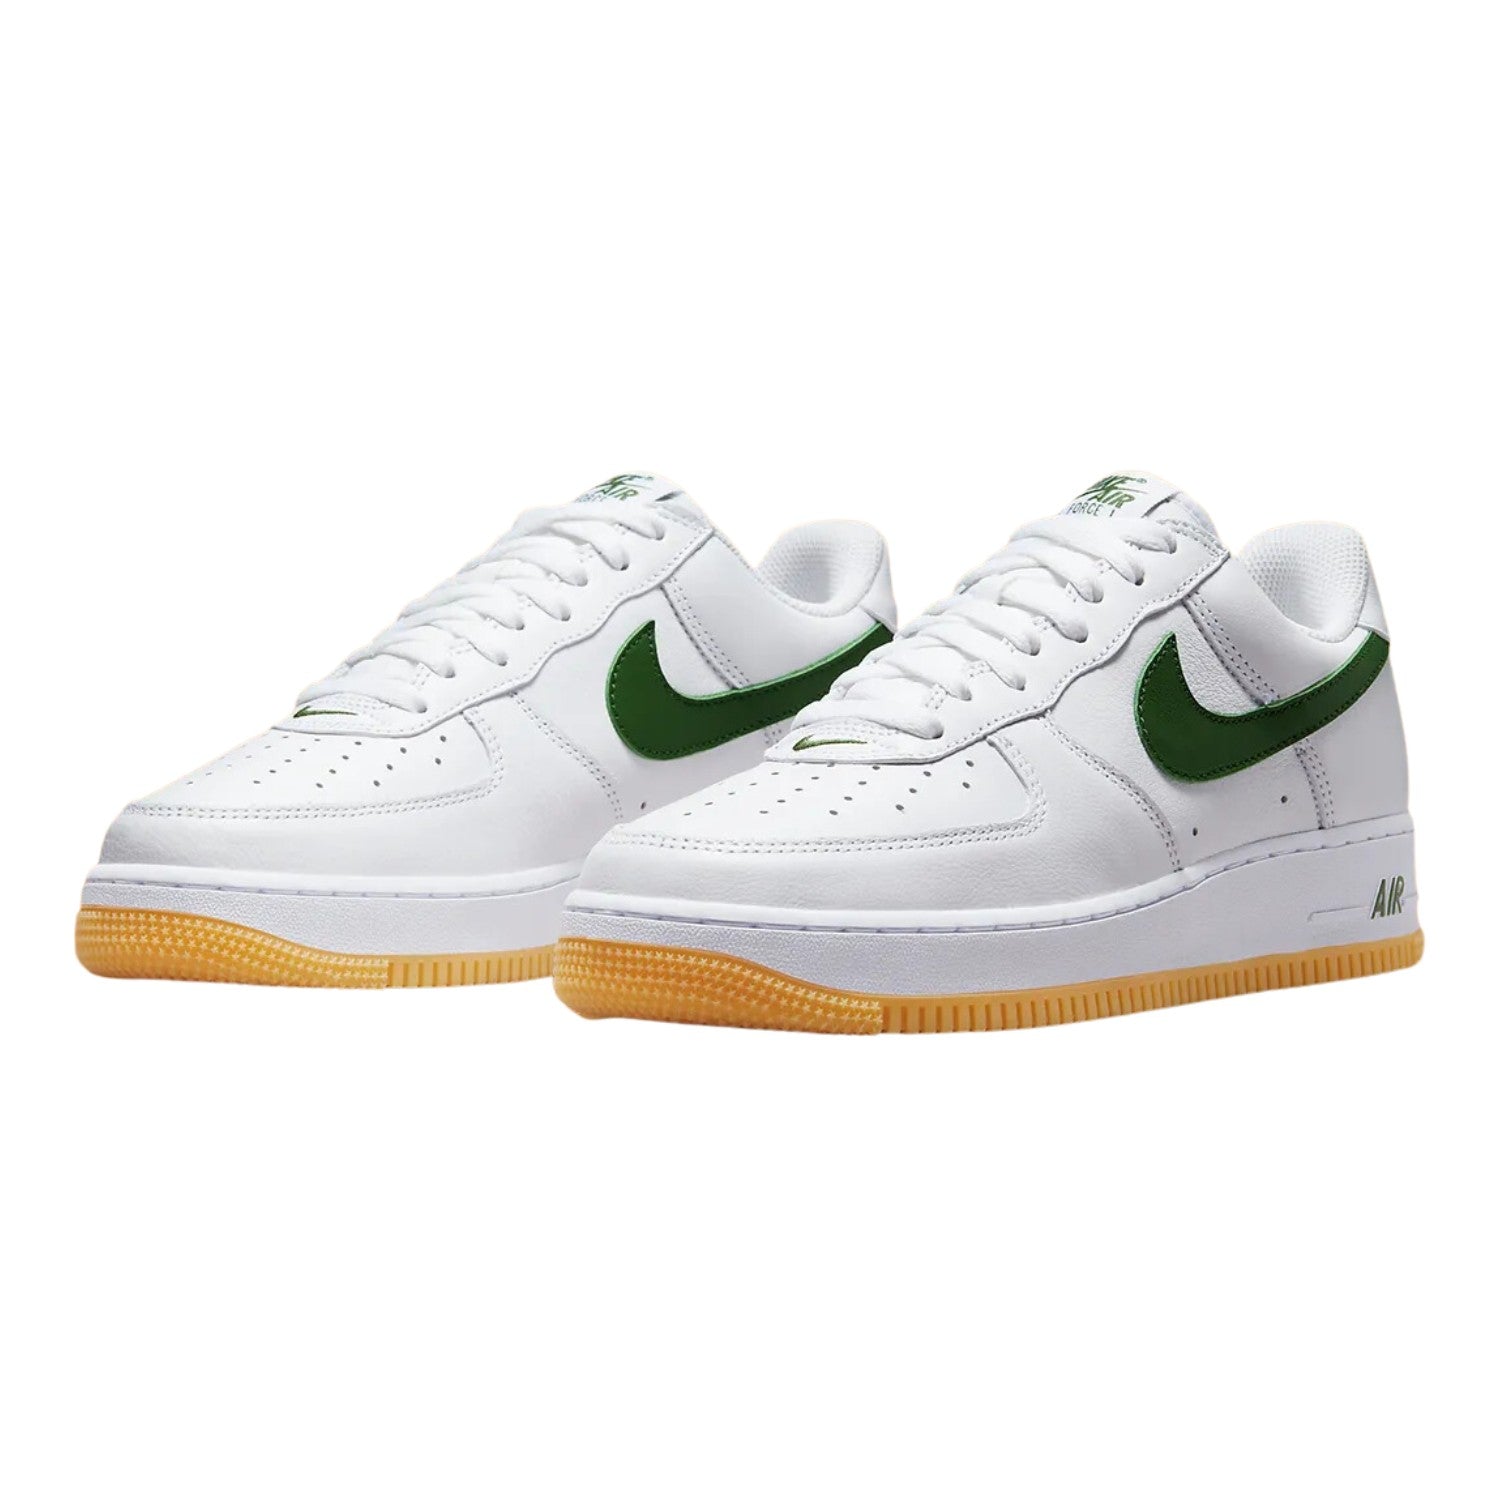 Nike Air Force 1 Low Retro Qs Mens Style : Fd7039